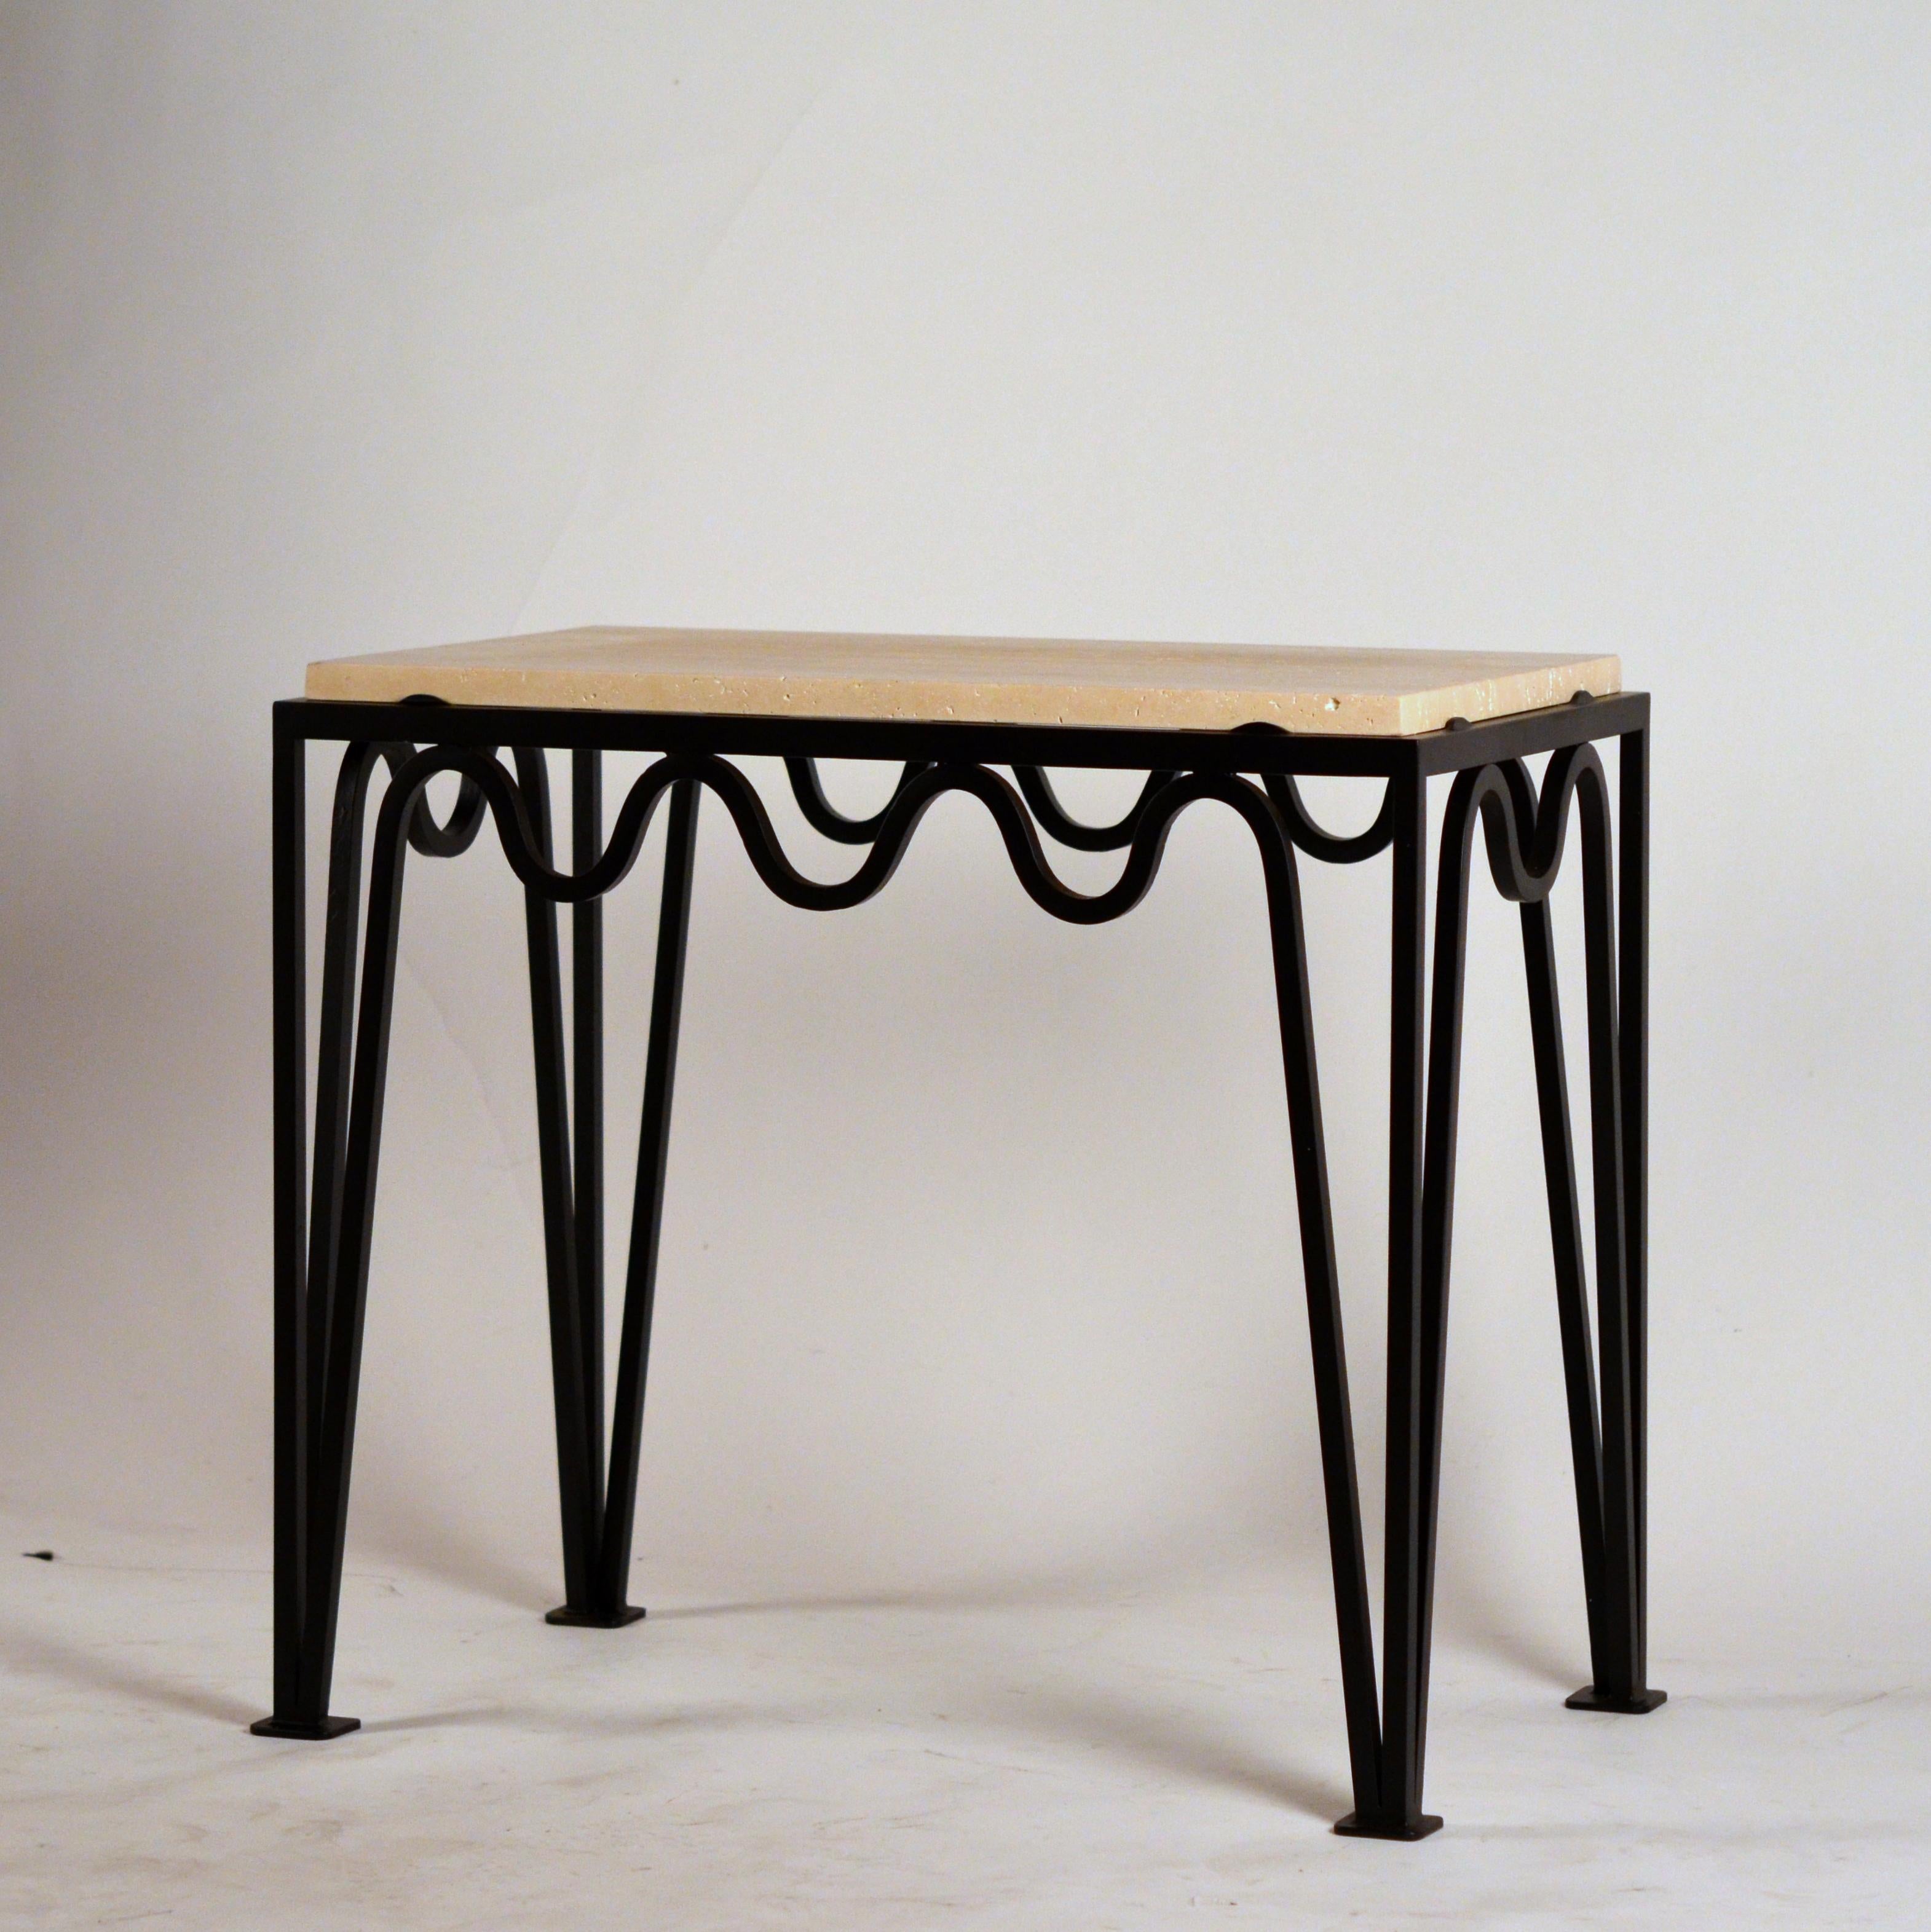 Pair of Chic 'Méandre' Black Iron and Travertine Side Tables by Design Frères For Sale 1